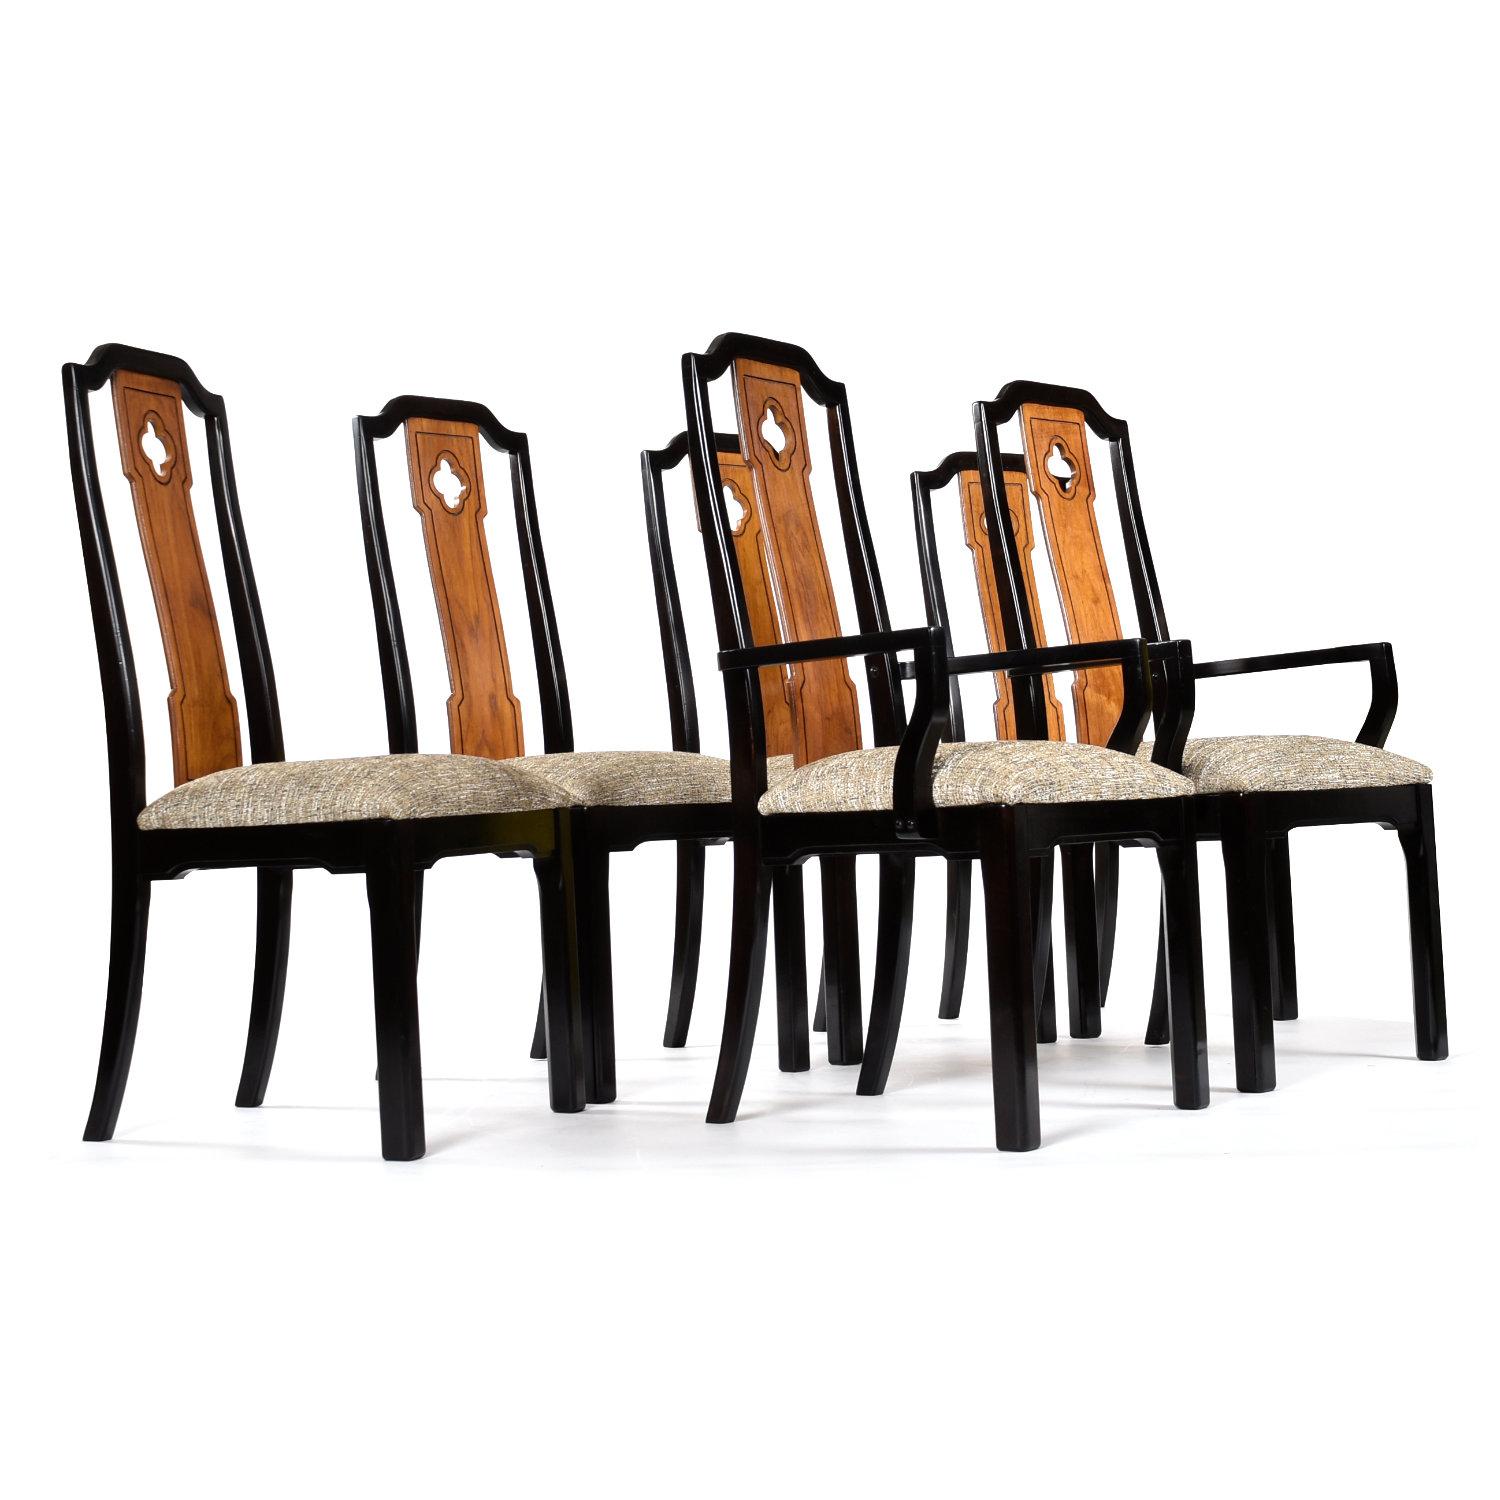 Lovingly restored, set of six vintage Nineteen-Laties Thomasville Embassy dining chairs. The Chinoiserie dining chairs have an Asian inspired silhouette. The notched Pagoda-like crown is the most pronounced Eastern influence. The blade-like back